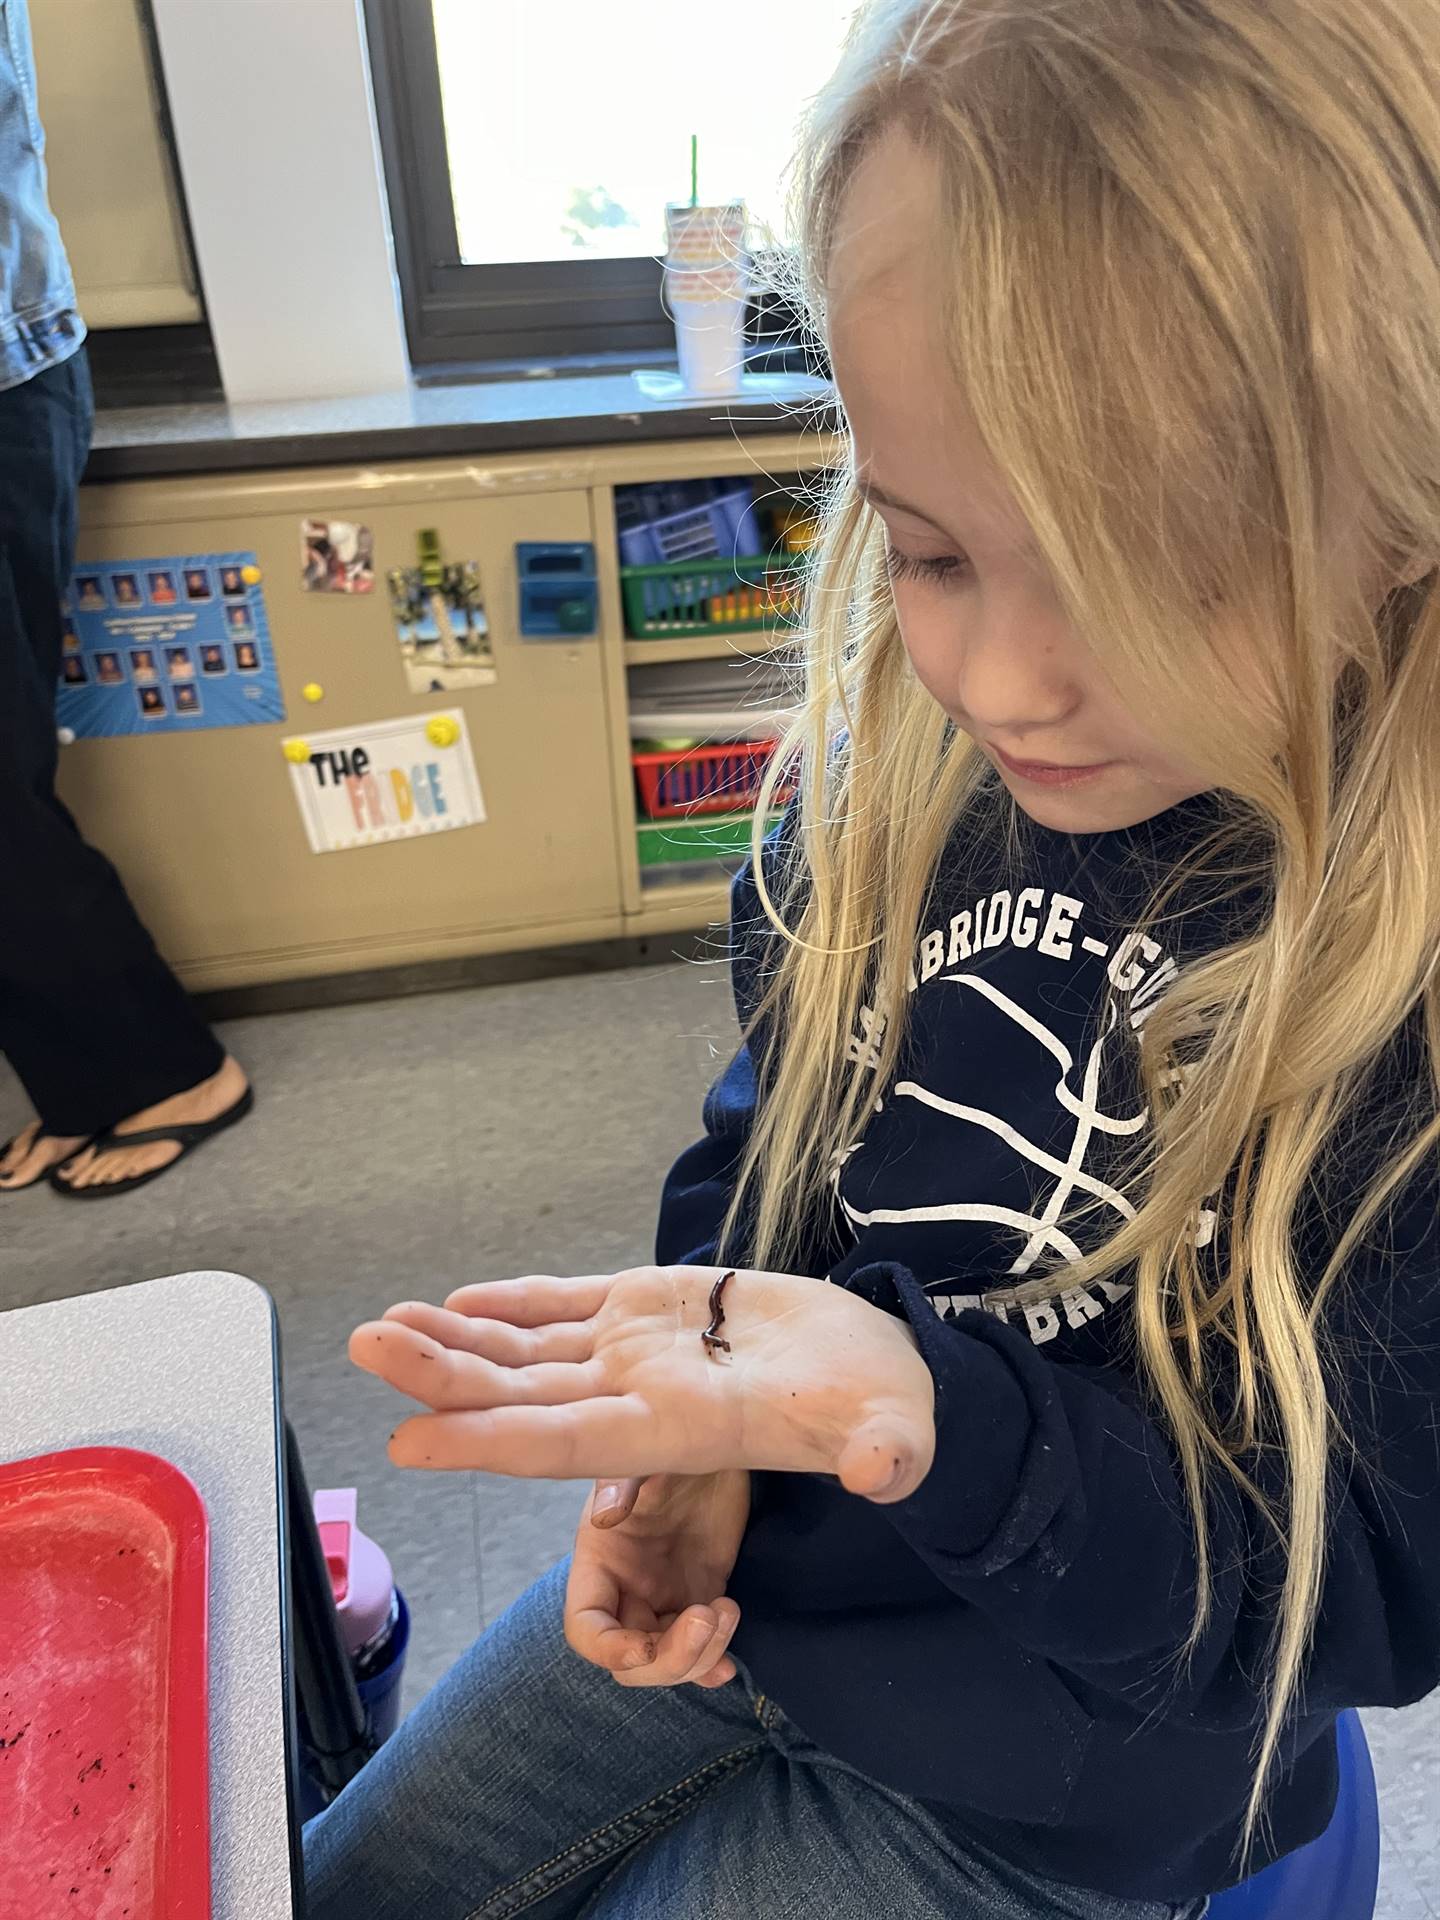 a student observes worms crawling on her hand